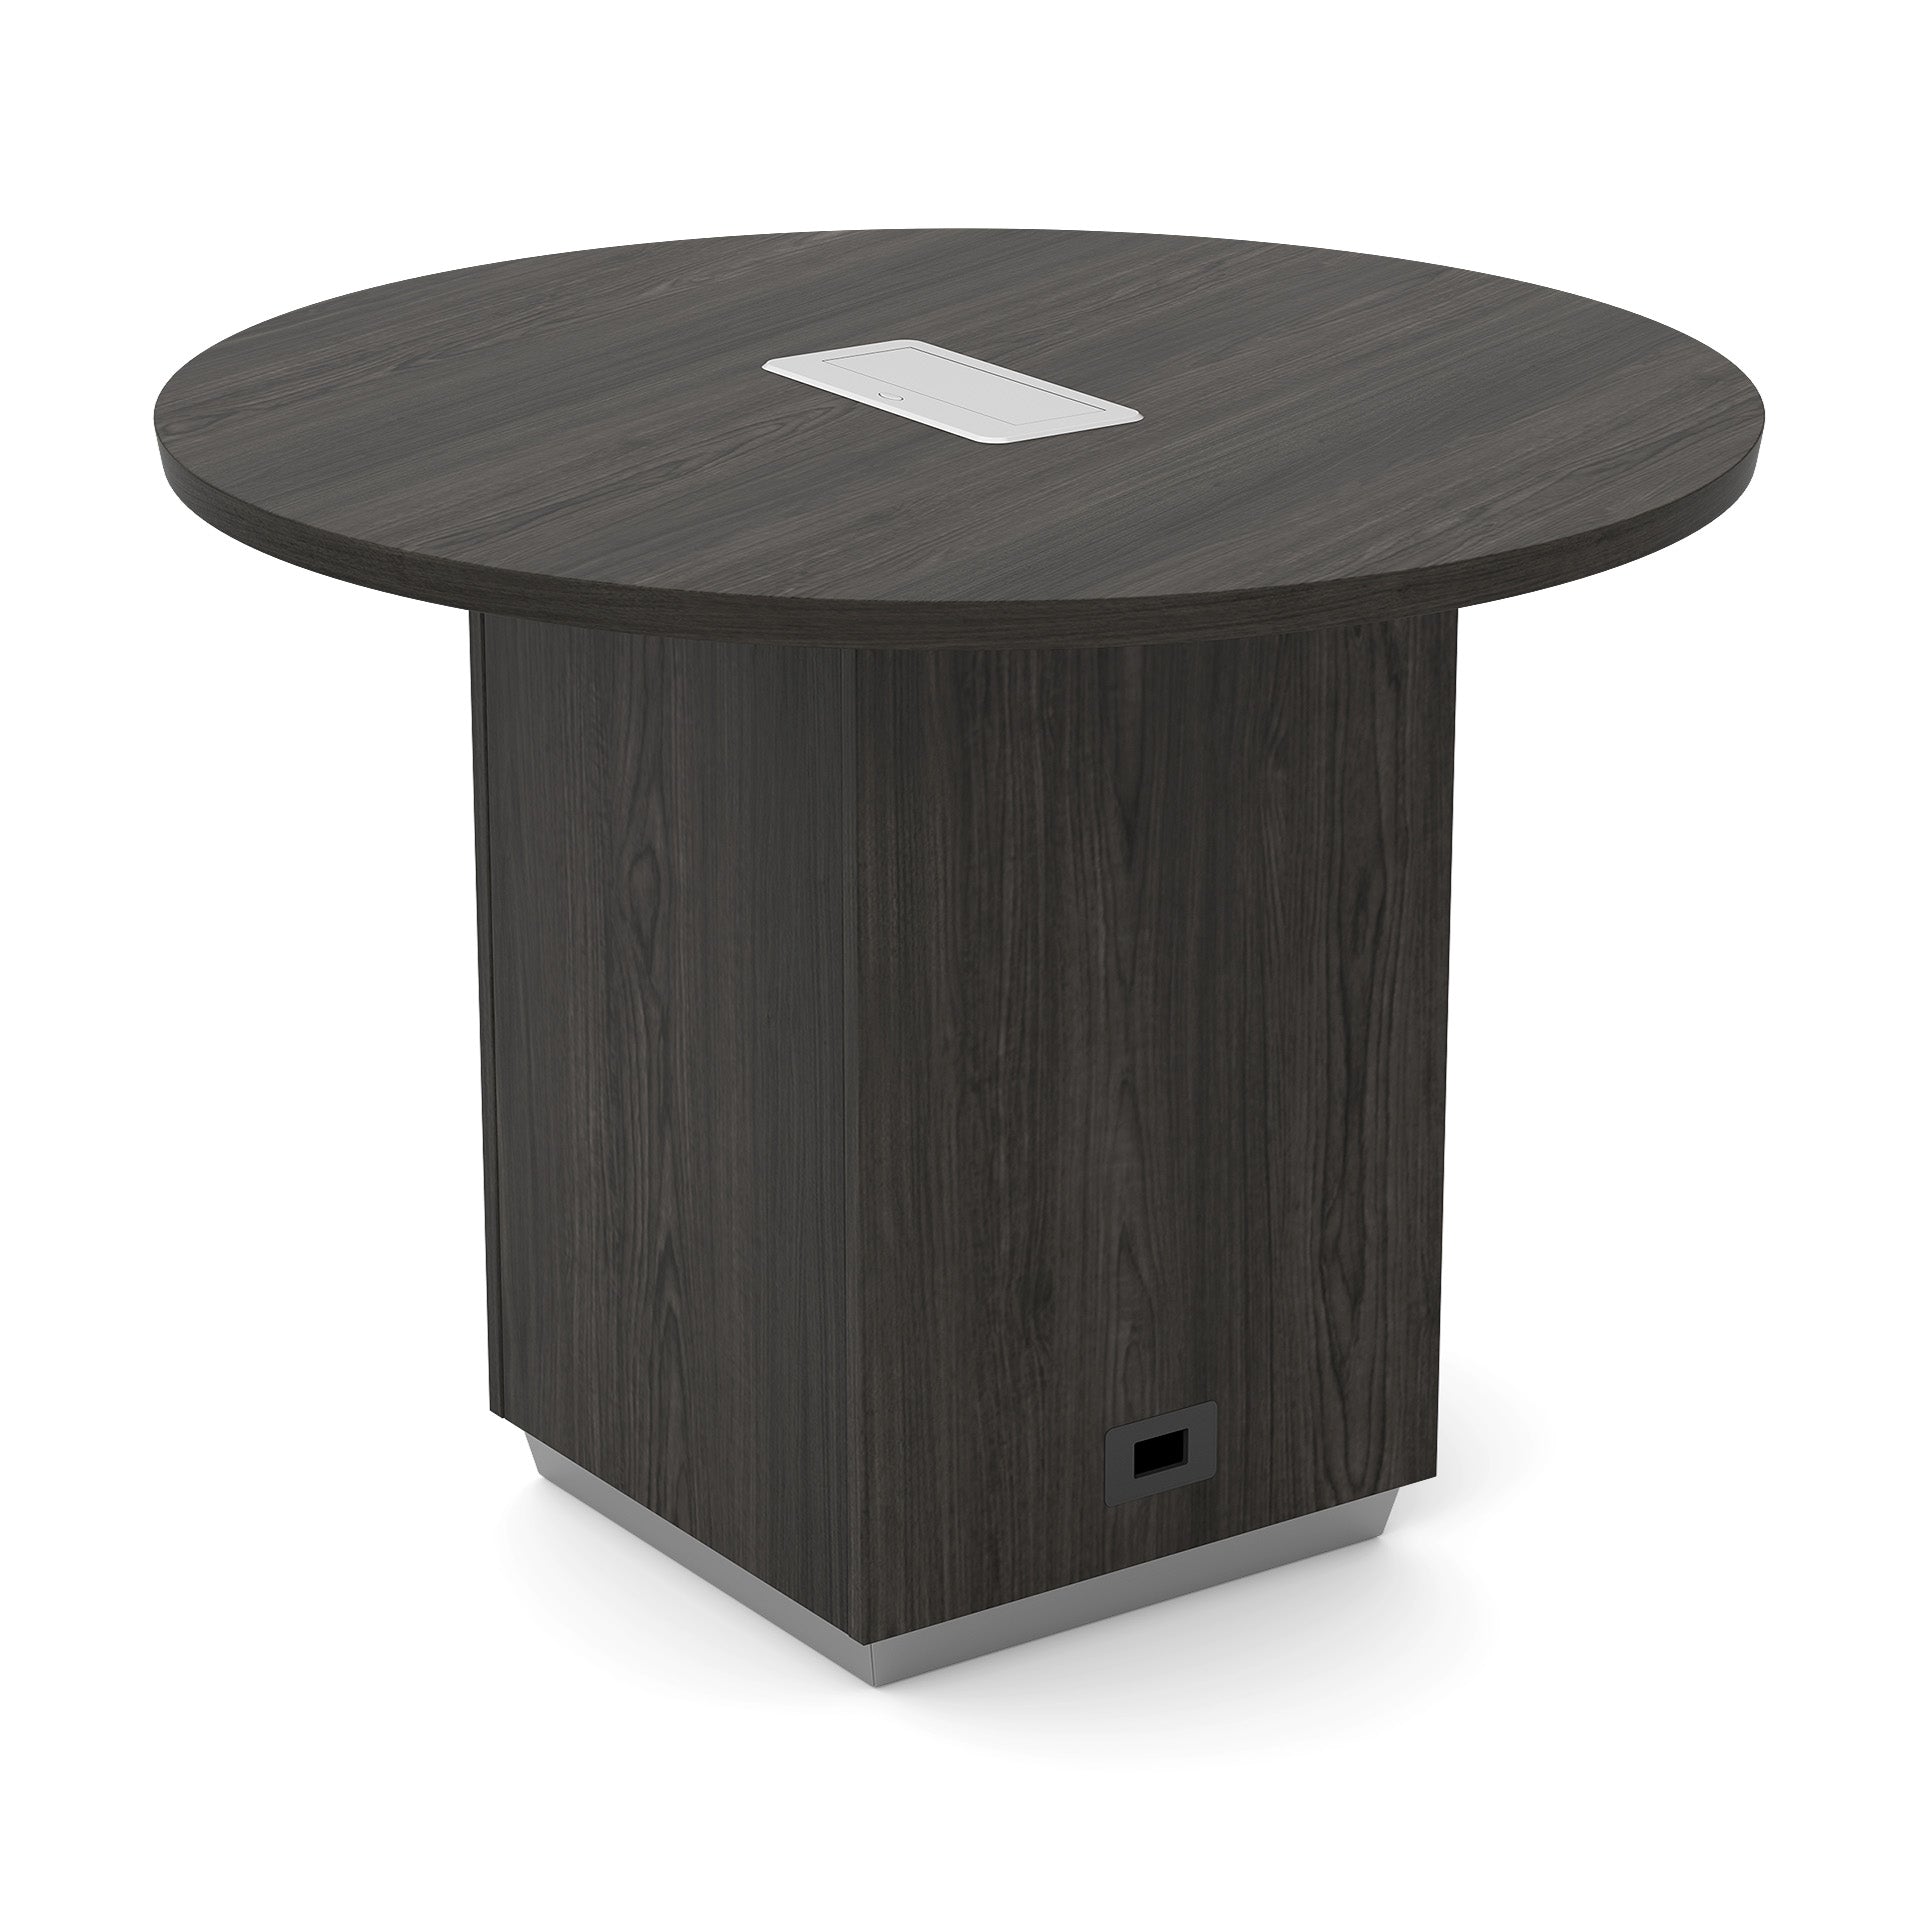 TUX159 - Tuxedo Series Round Conference Table by OSP